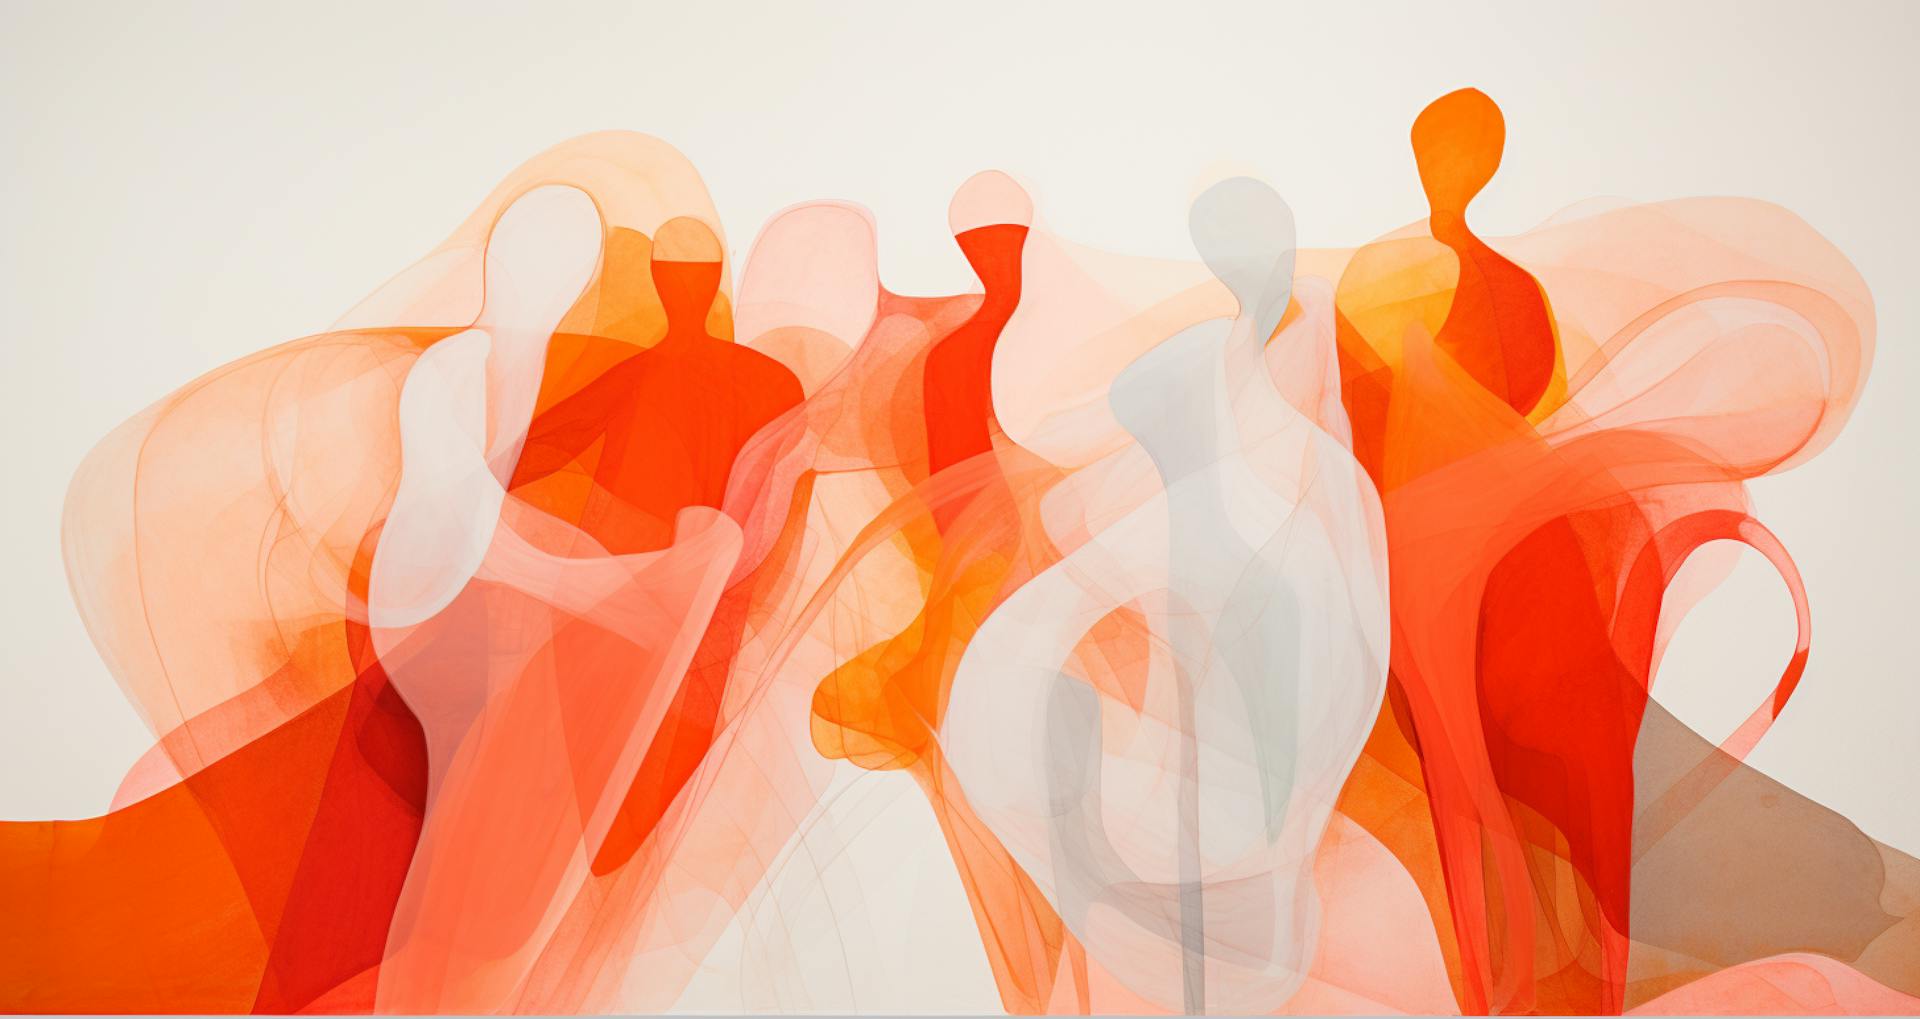 An abstract artistic image with orange figures on a white background